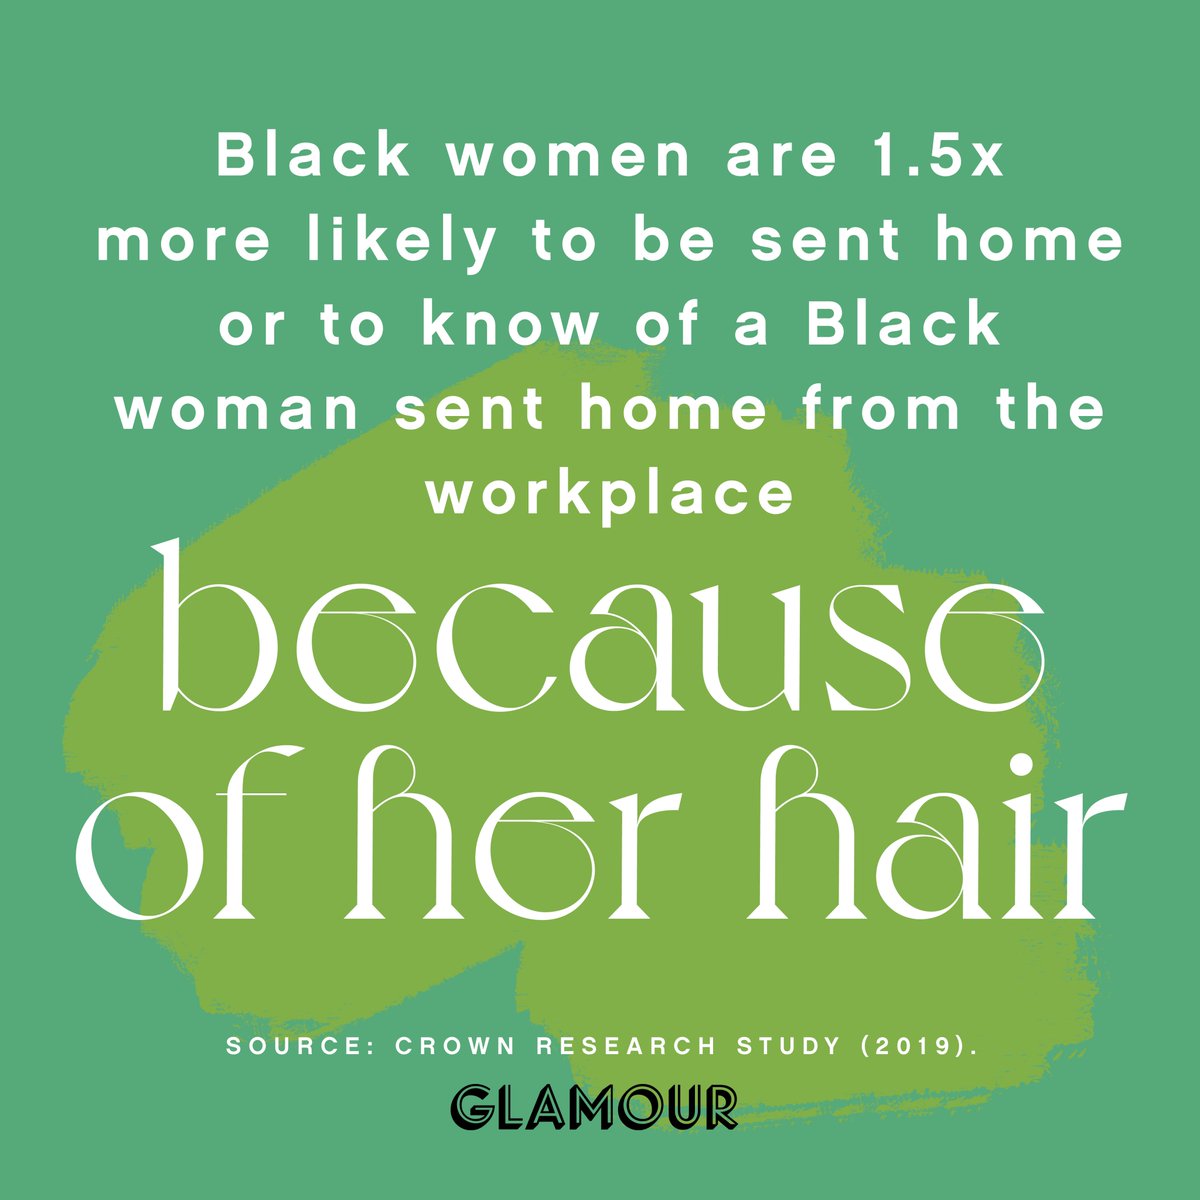 The practice of workplace hair discrimination has been alive and well for decades. This bias is precisely why  #TheCrownAct (Creating a Respectful and Open World for Natural Hair) now exists.  http://glmr.co/QmqZoZK   #OurHairIssue